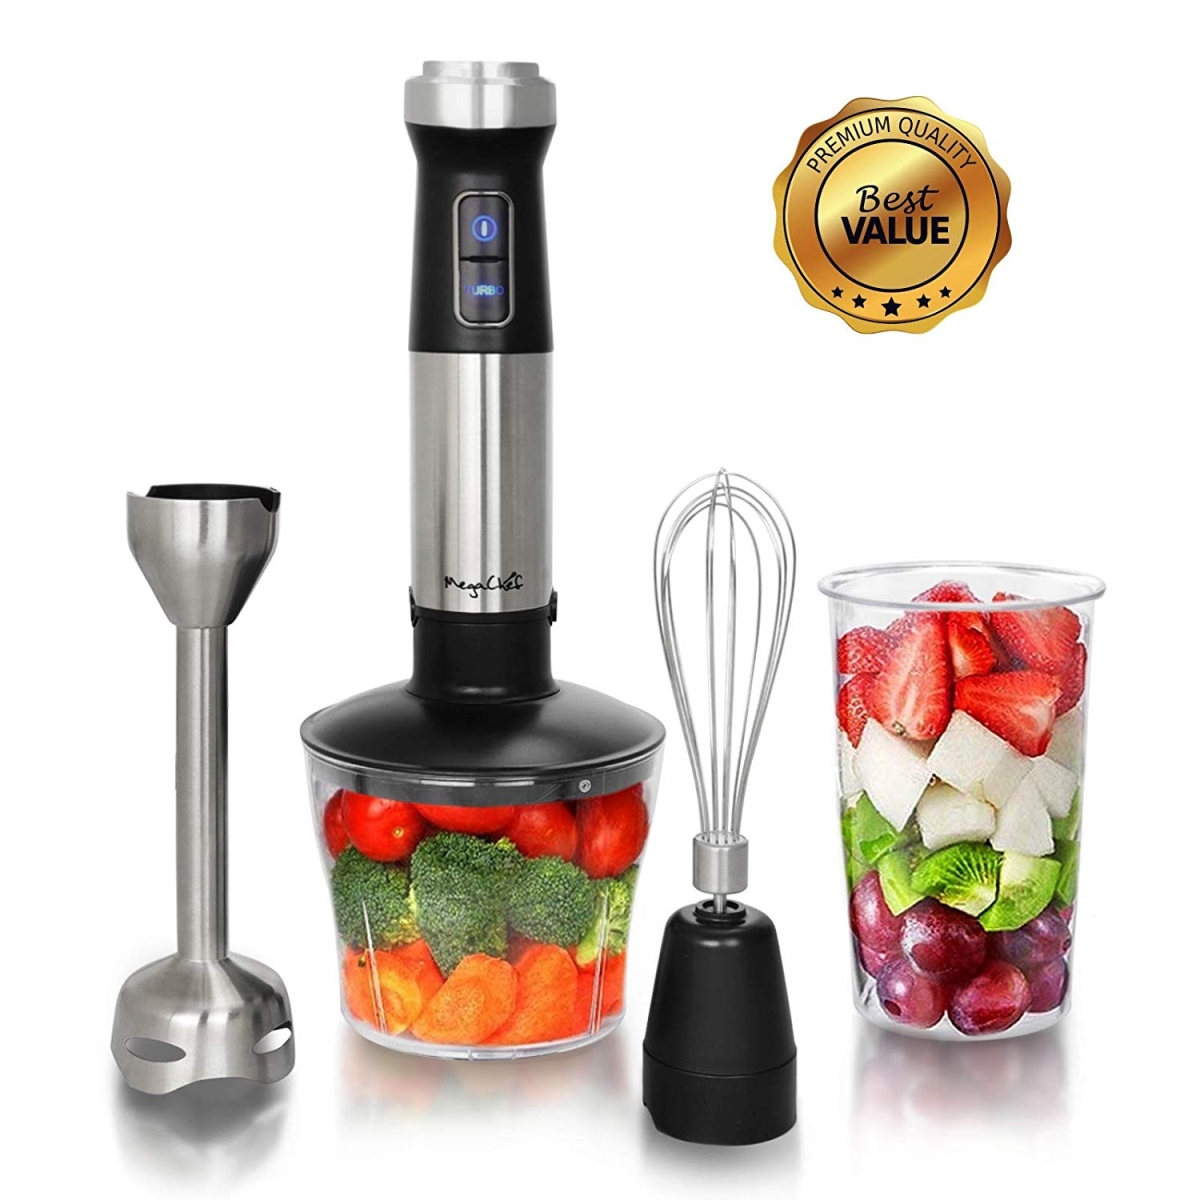 Mc-158c 4 In. 1 Multipurpose Immersion Hand Blender With Speed Control